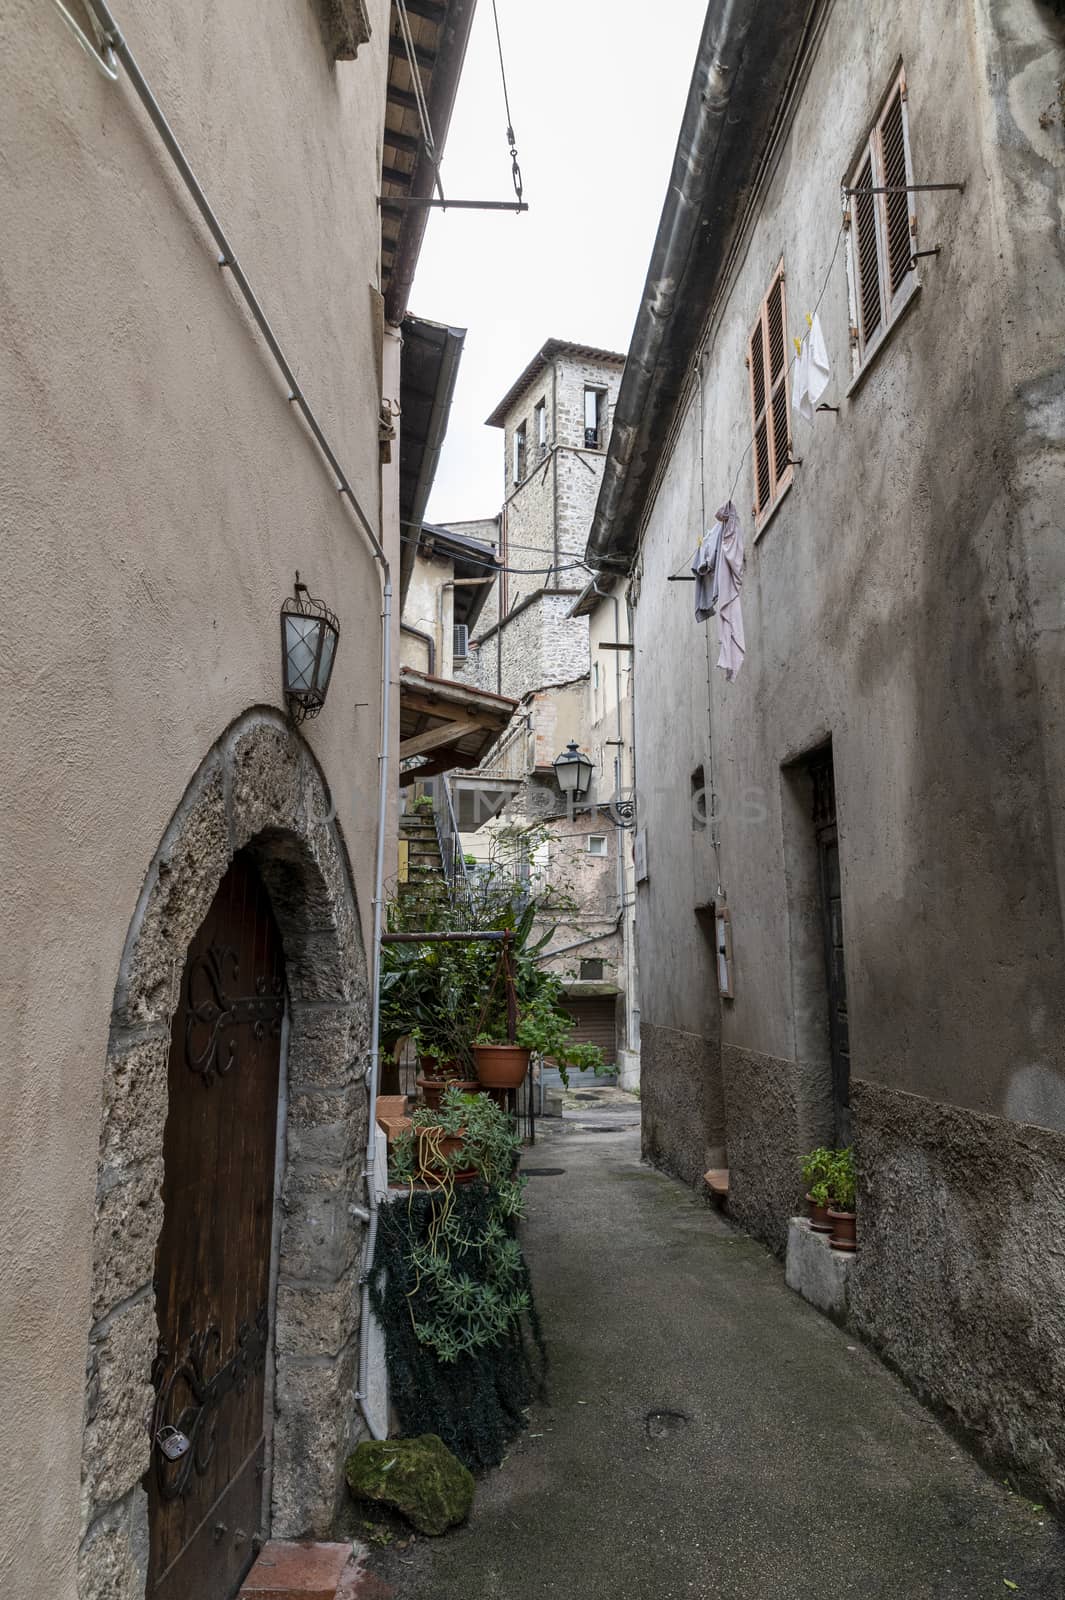 architecture of glimpses of the narrow streets of the town of Papigno by carfedeph